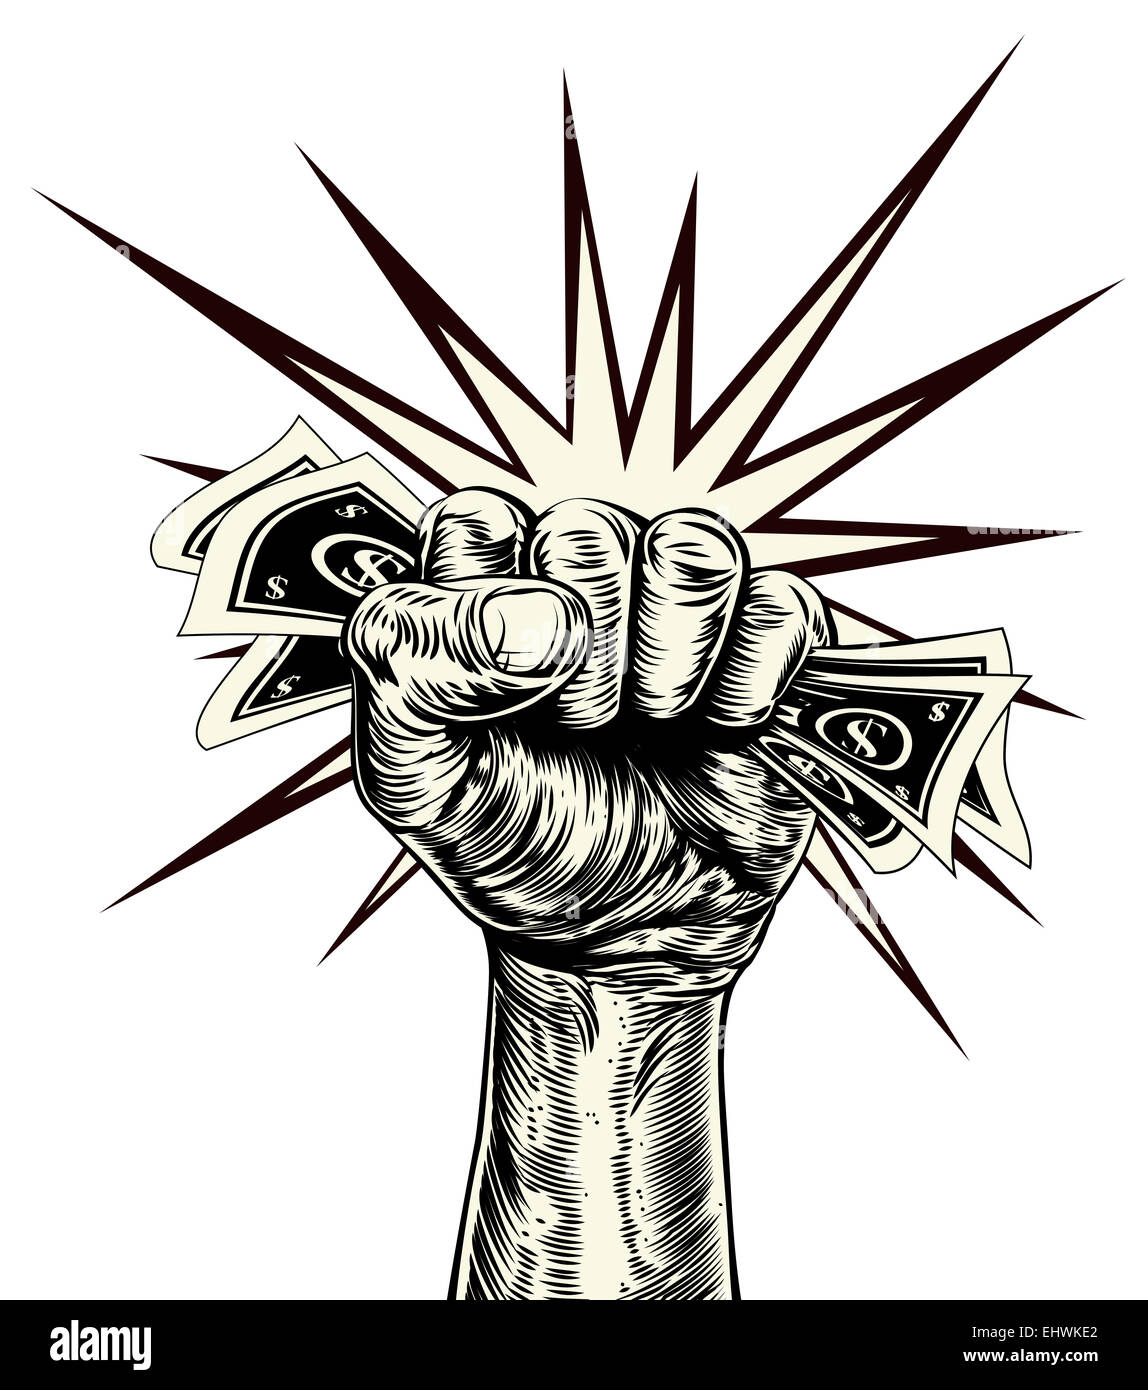 An original illustration of a dynamic fist holding money in a vintage wood cut propaganda style Stock Photo